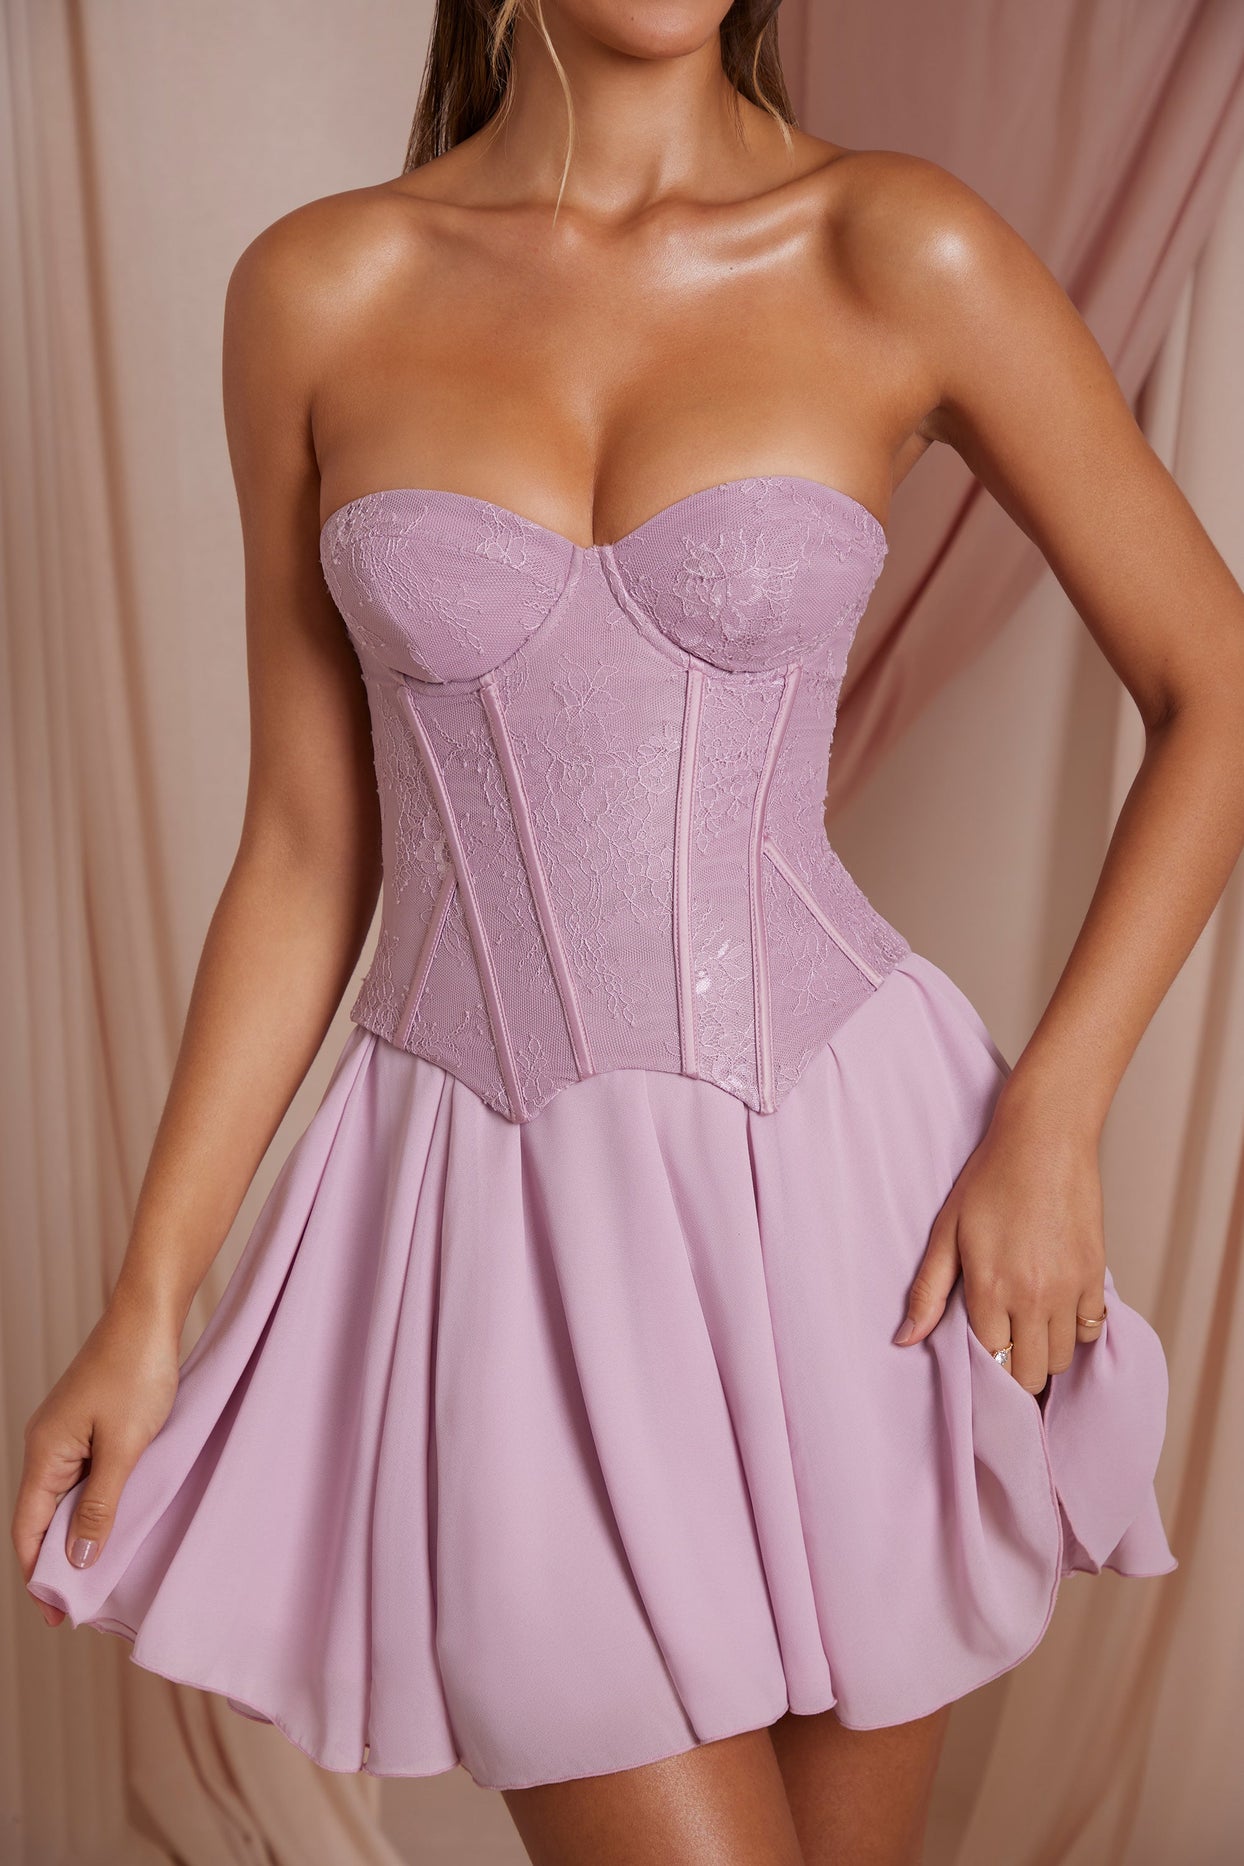 Light Years Strapless Bustier Hot Pink